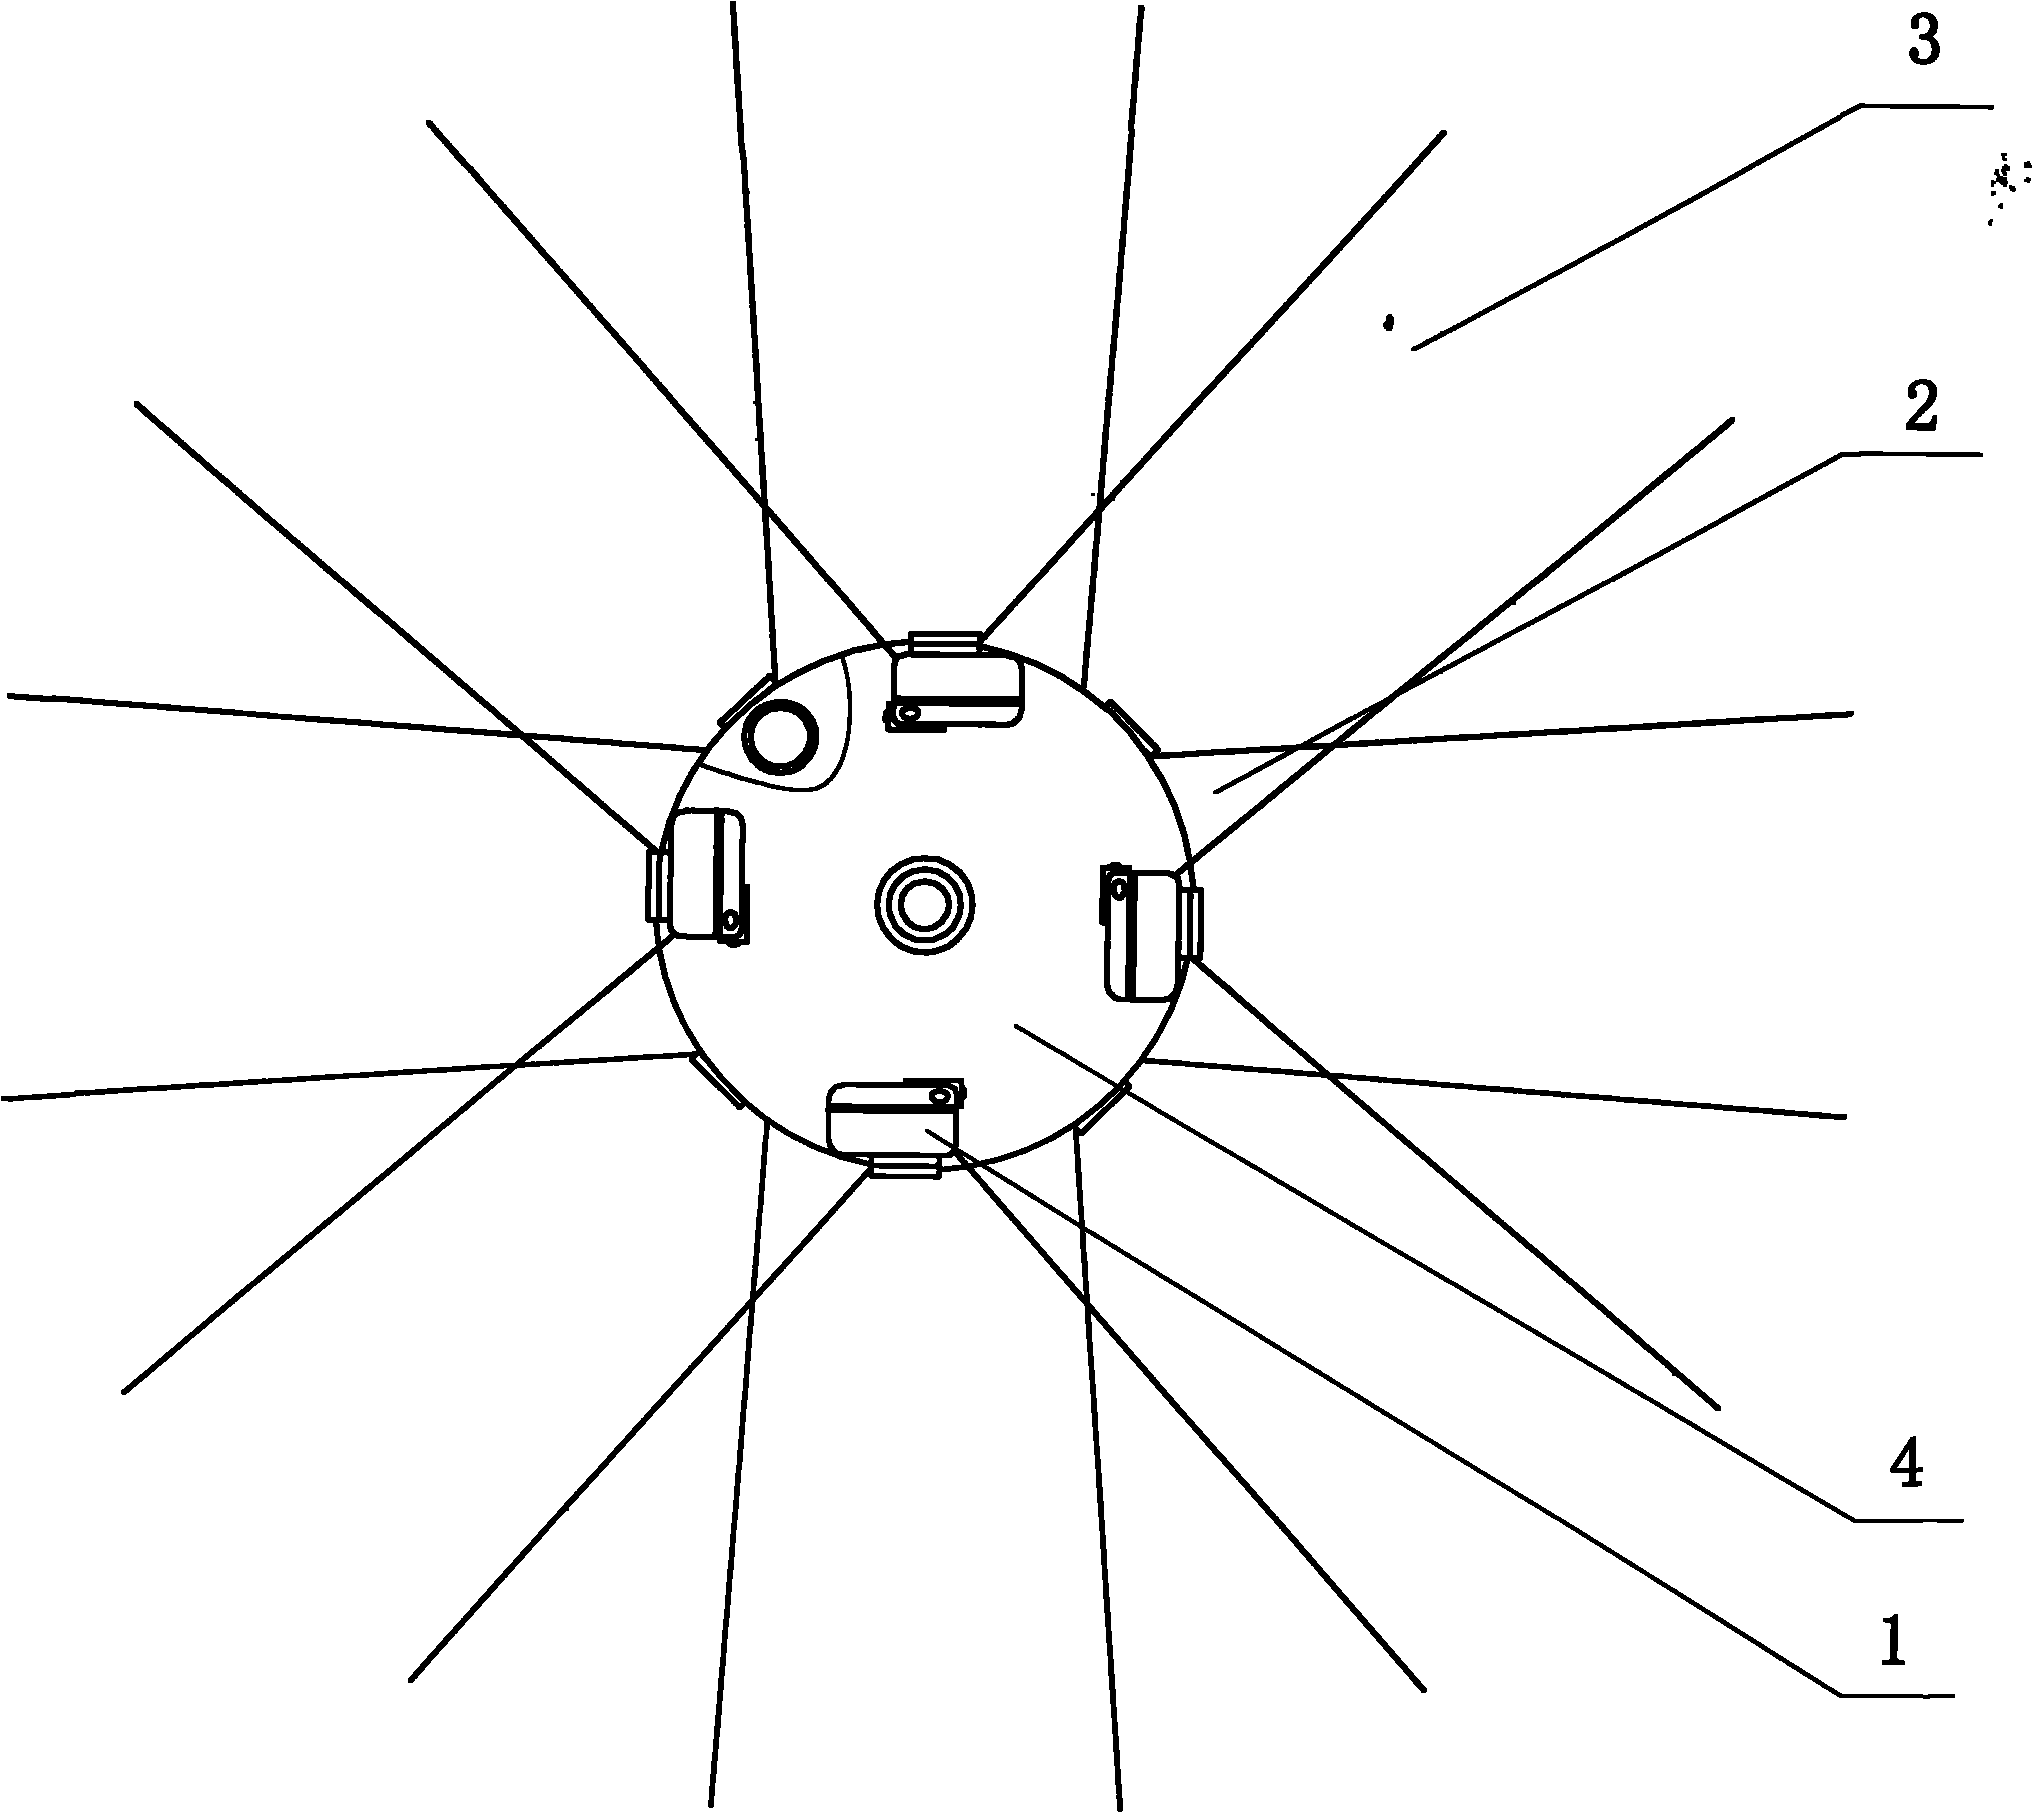 Small-diameter head structure with cameras